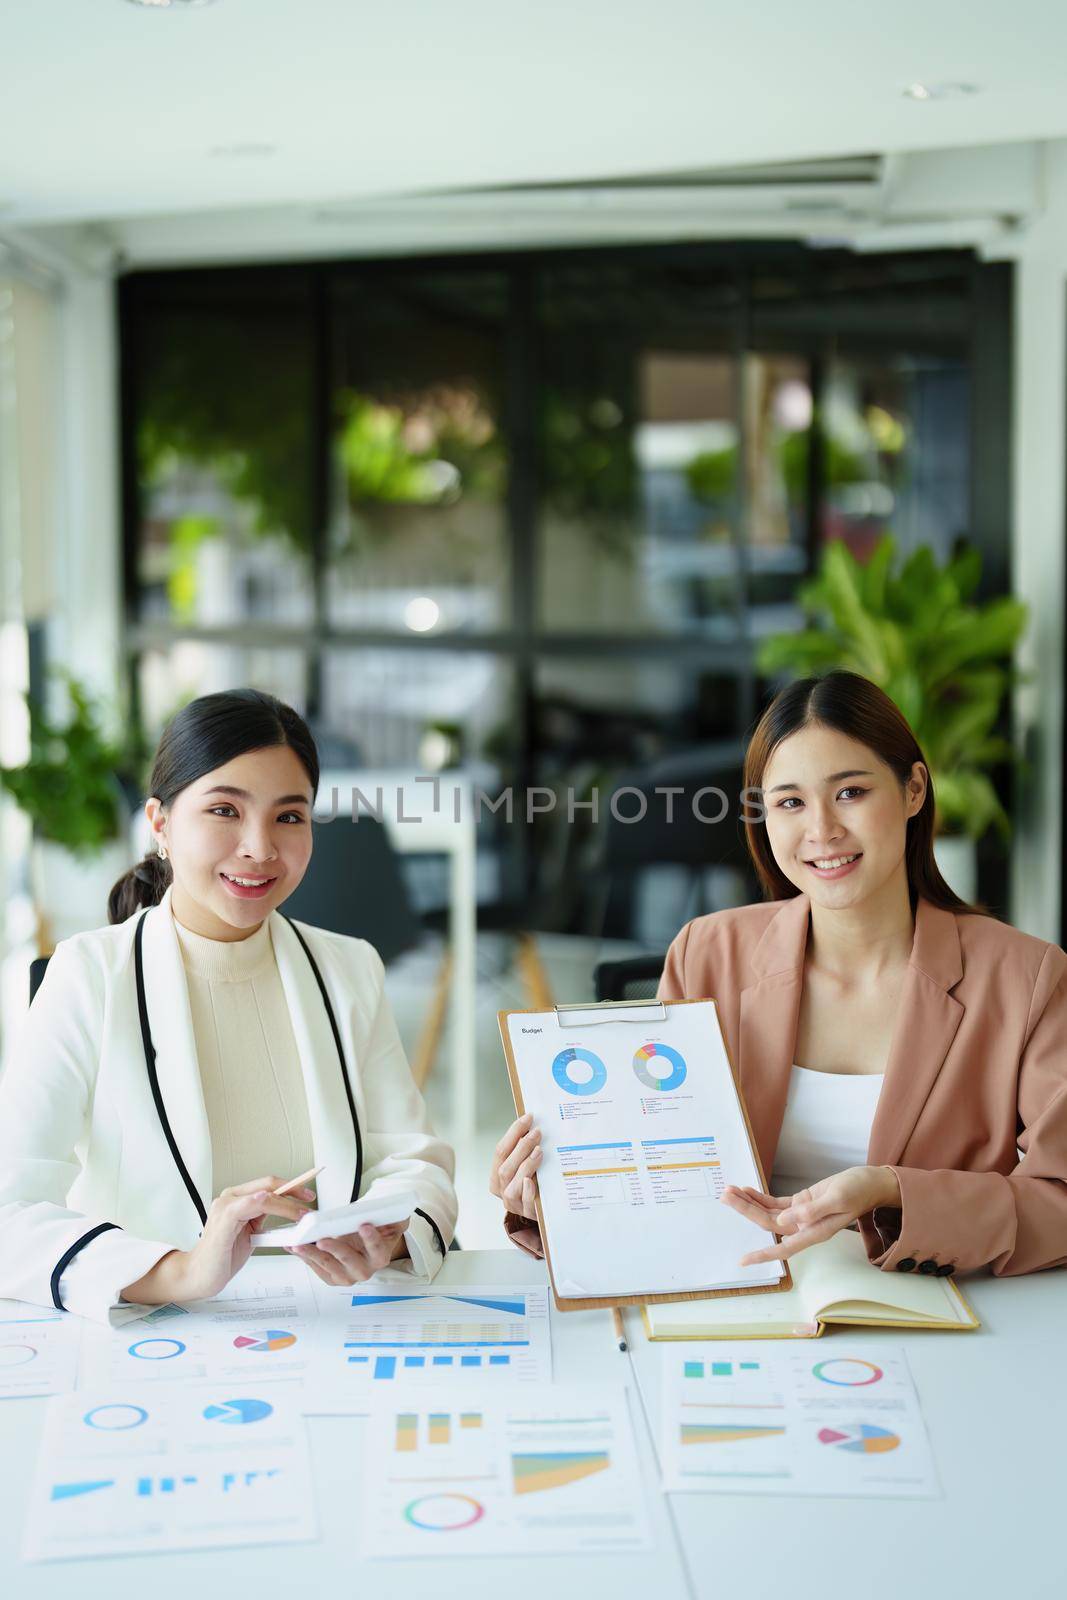 A portrait of a marketer and a salesperson offering products to customers in order to make a profit for the company.